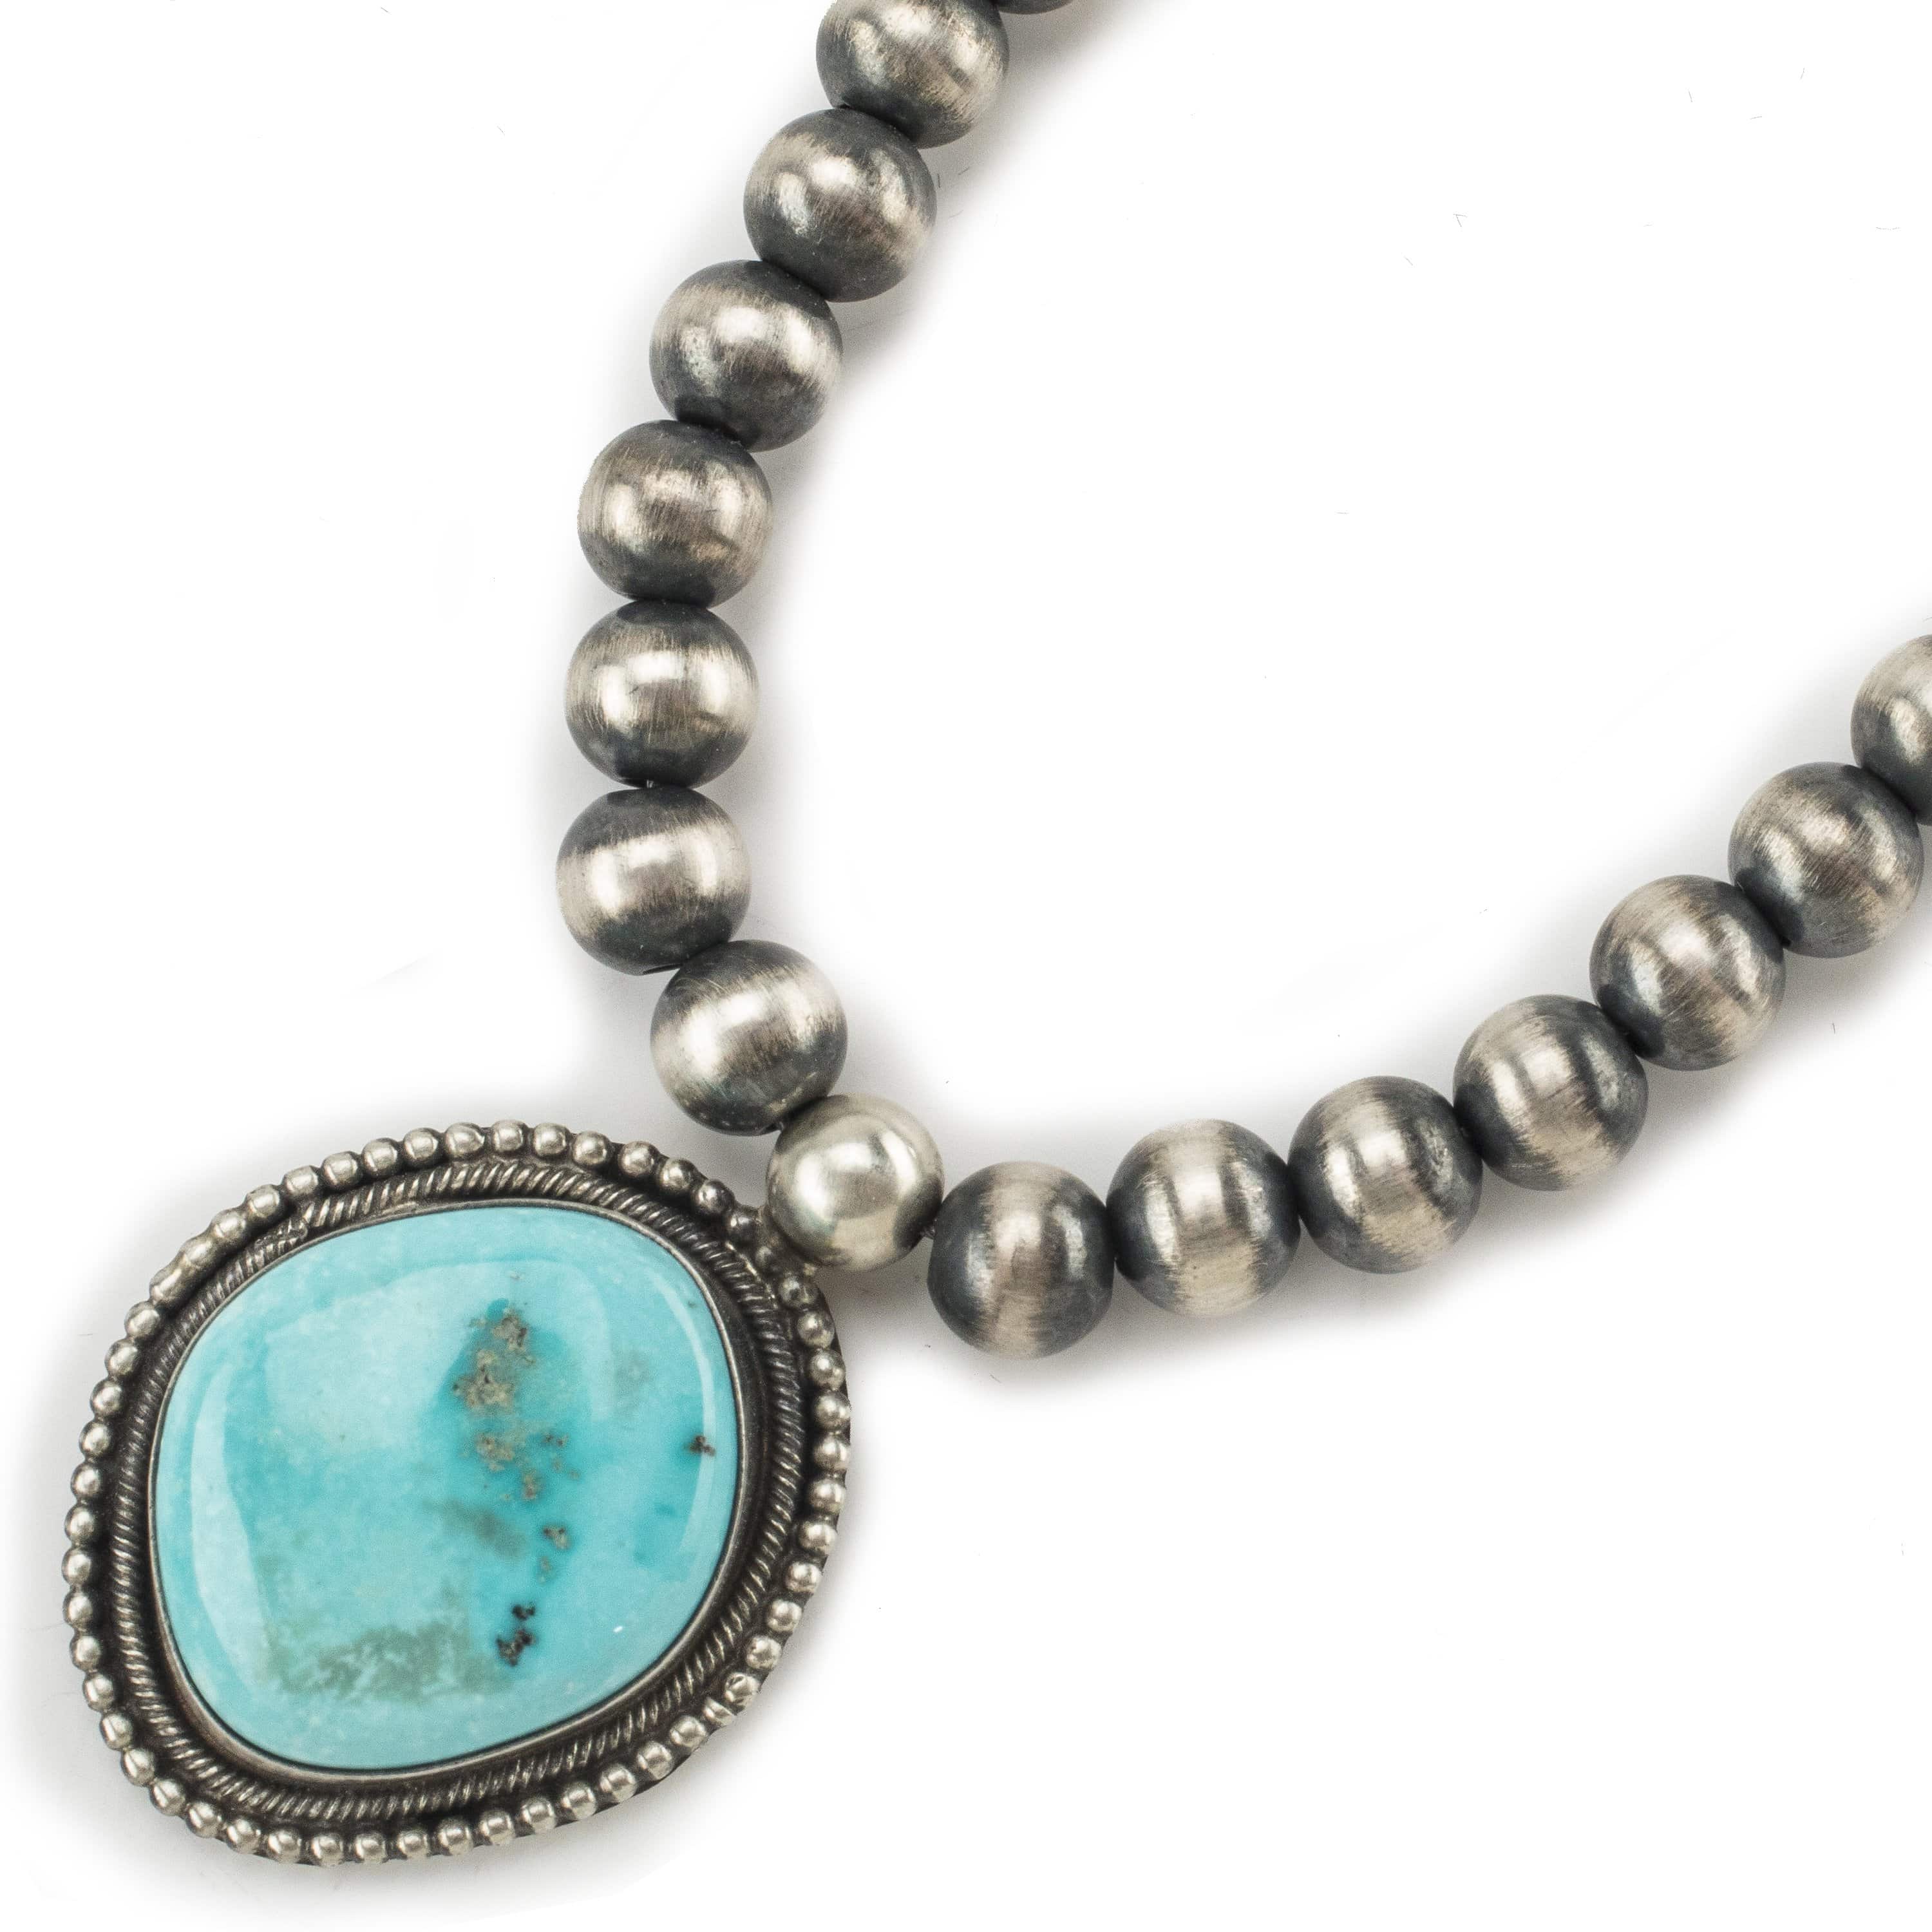 Kalifano Native American Jewelry Kee-J Sonoran Rose Turquoise Pendant and Navajo Pearl USA Native American Made 925 Sterling Silver Necklace NAN1300.005